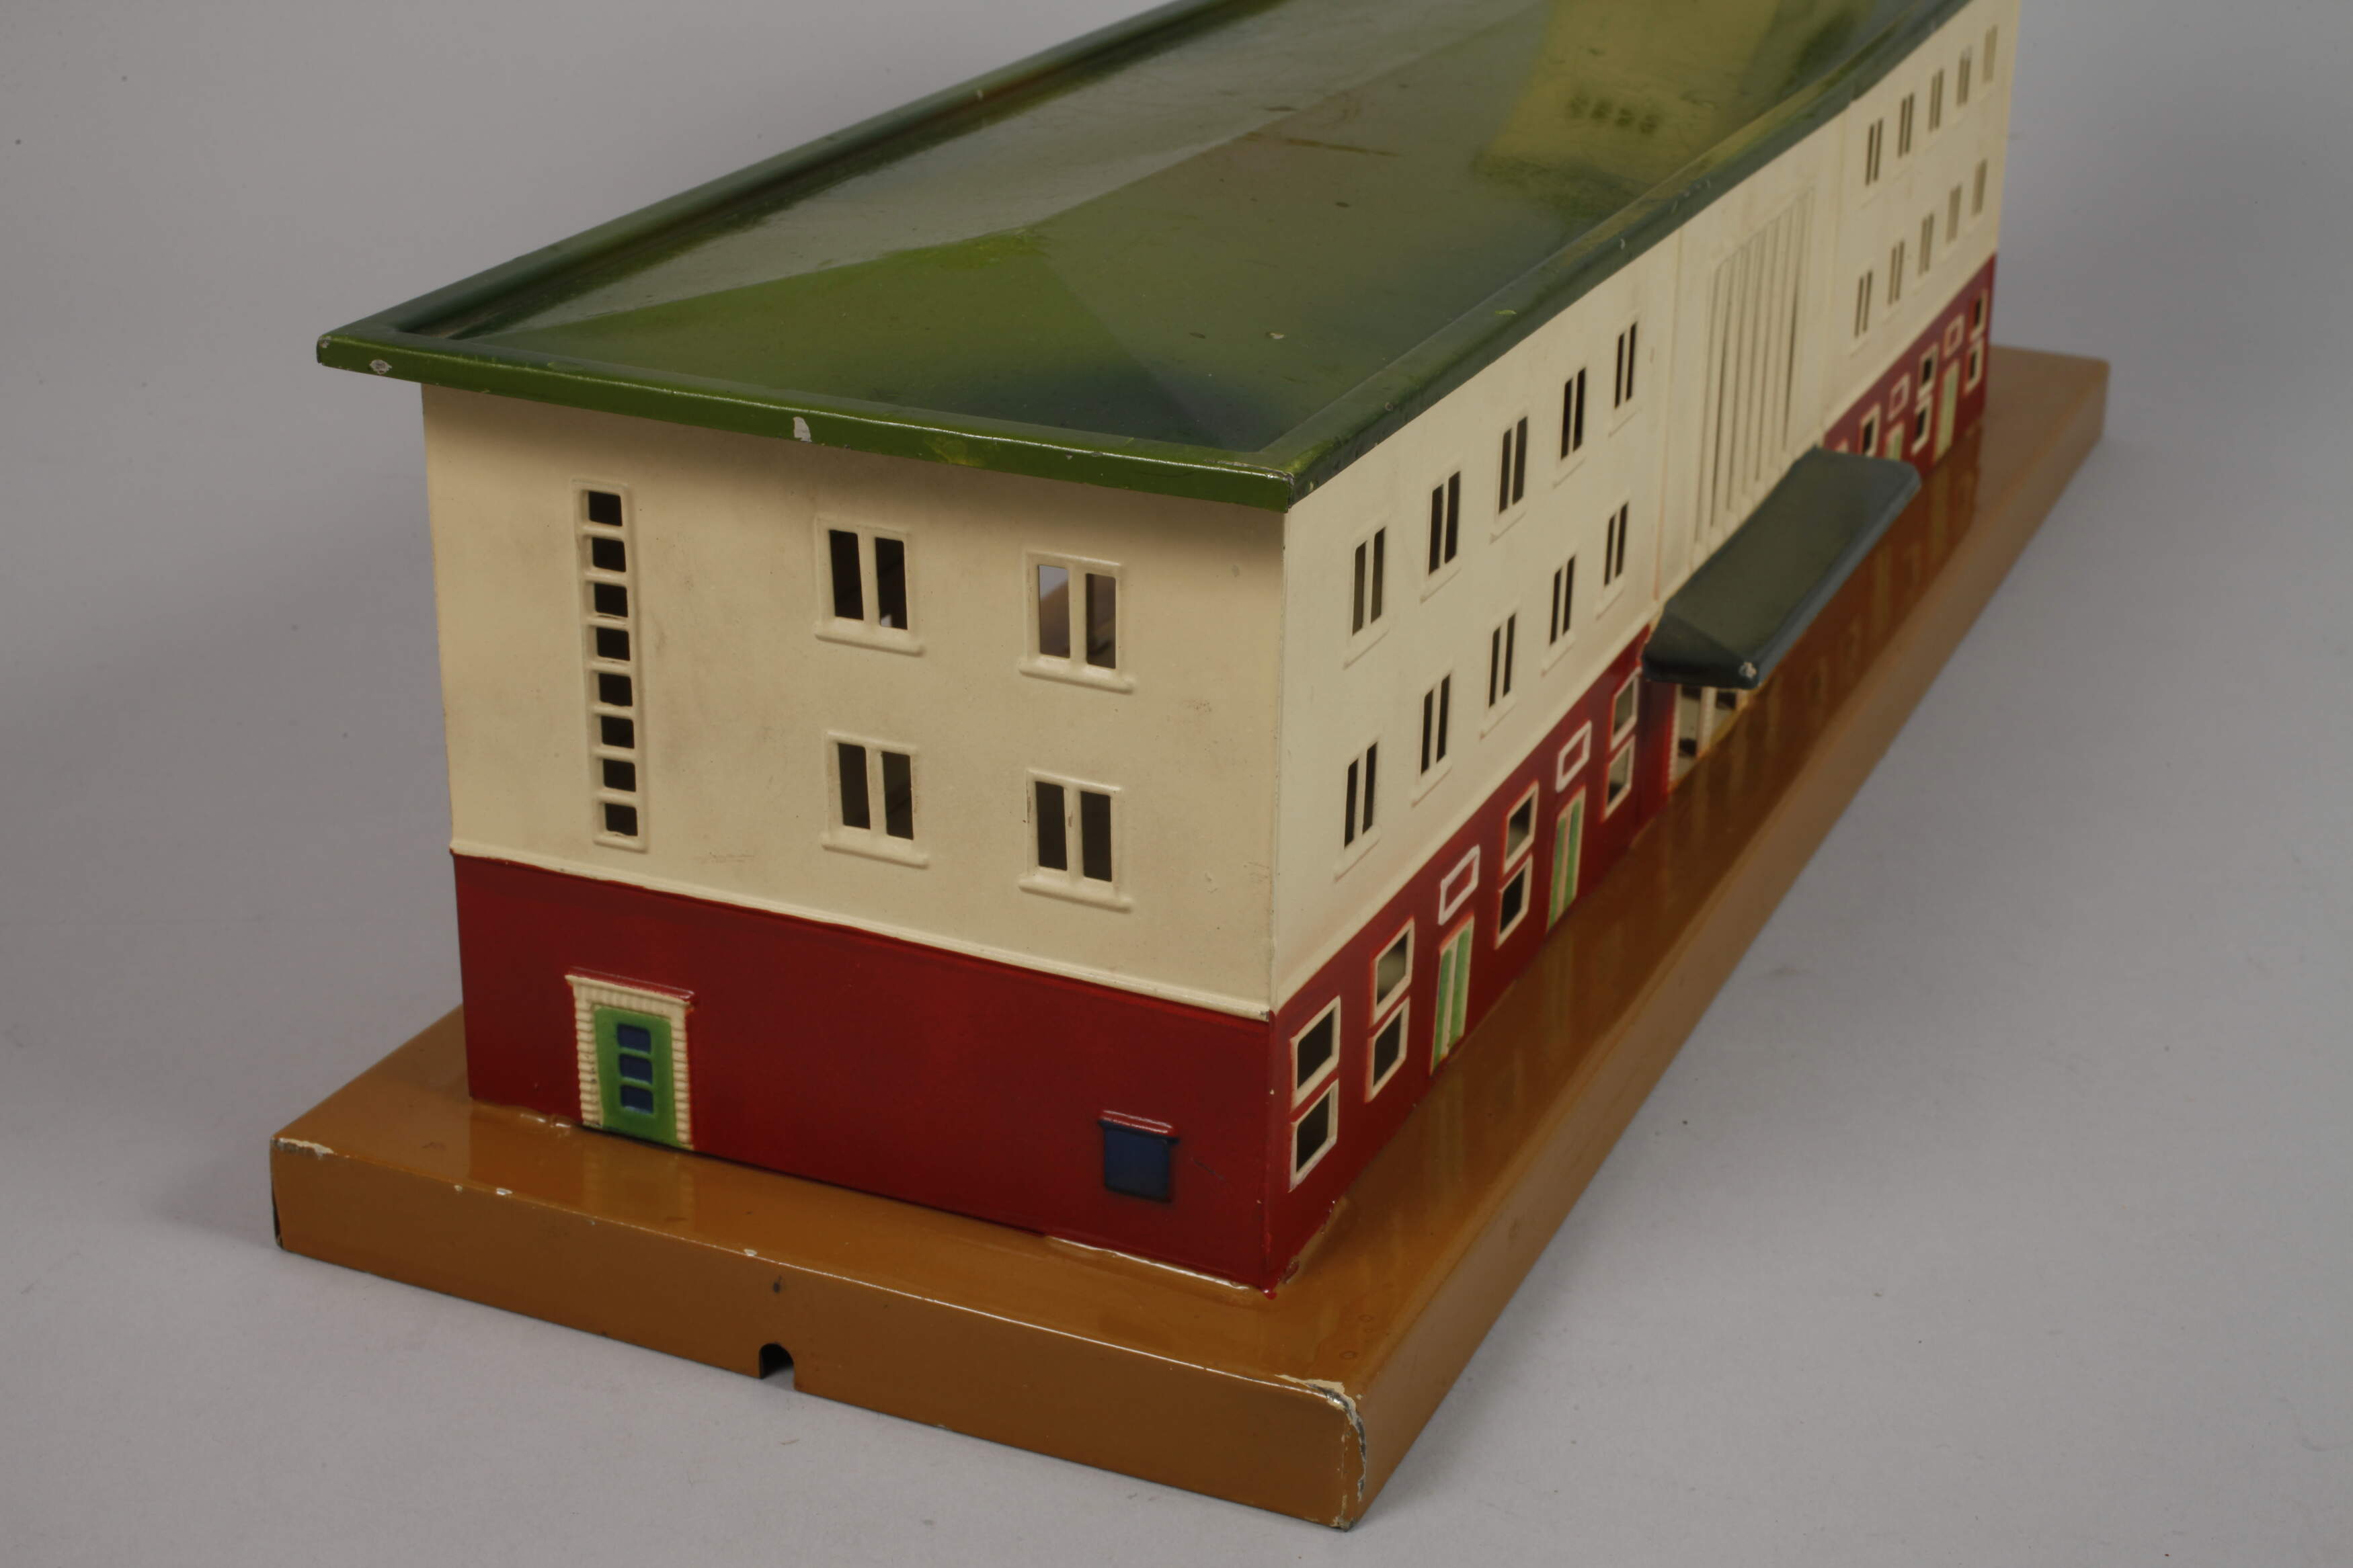 Märklin collection of freight wagons and railway accessories - Image 9 of 10